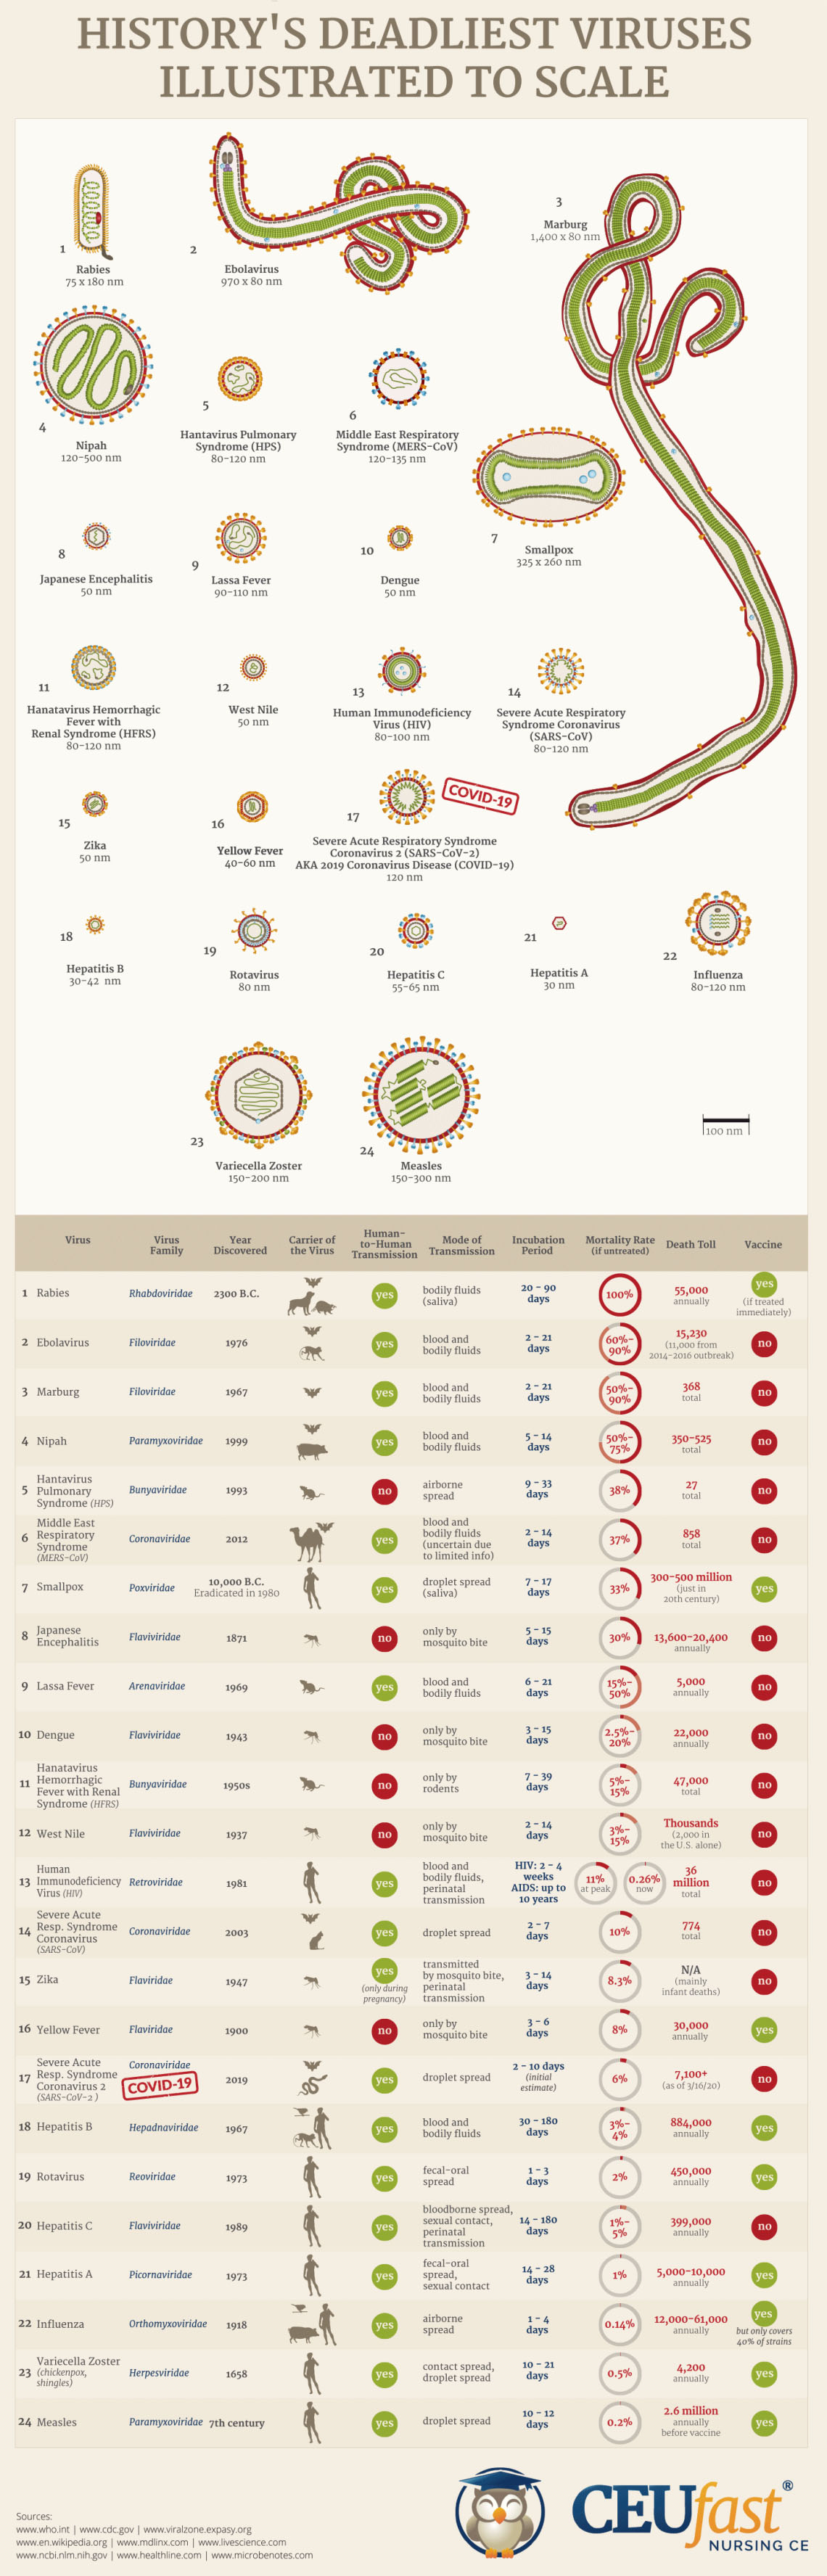 History’s Deadliest Viruses Illustrated to Scale